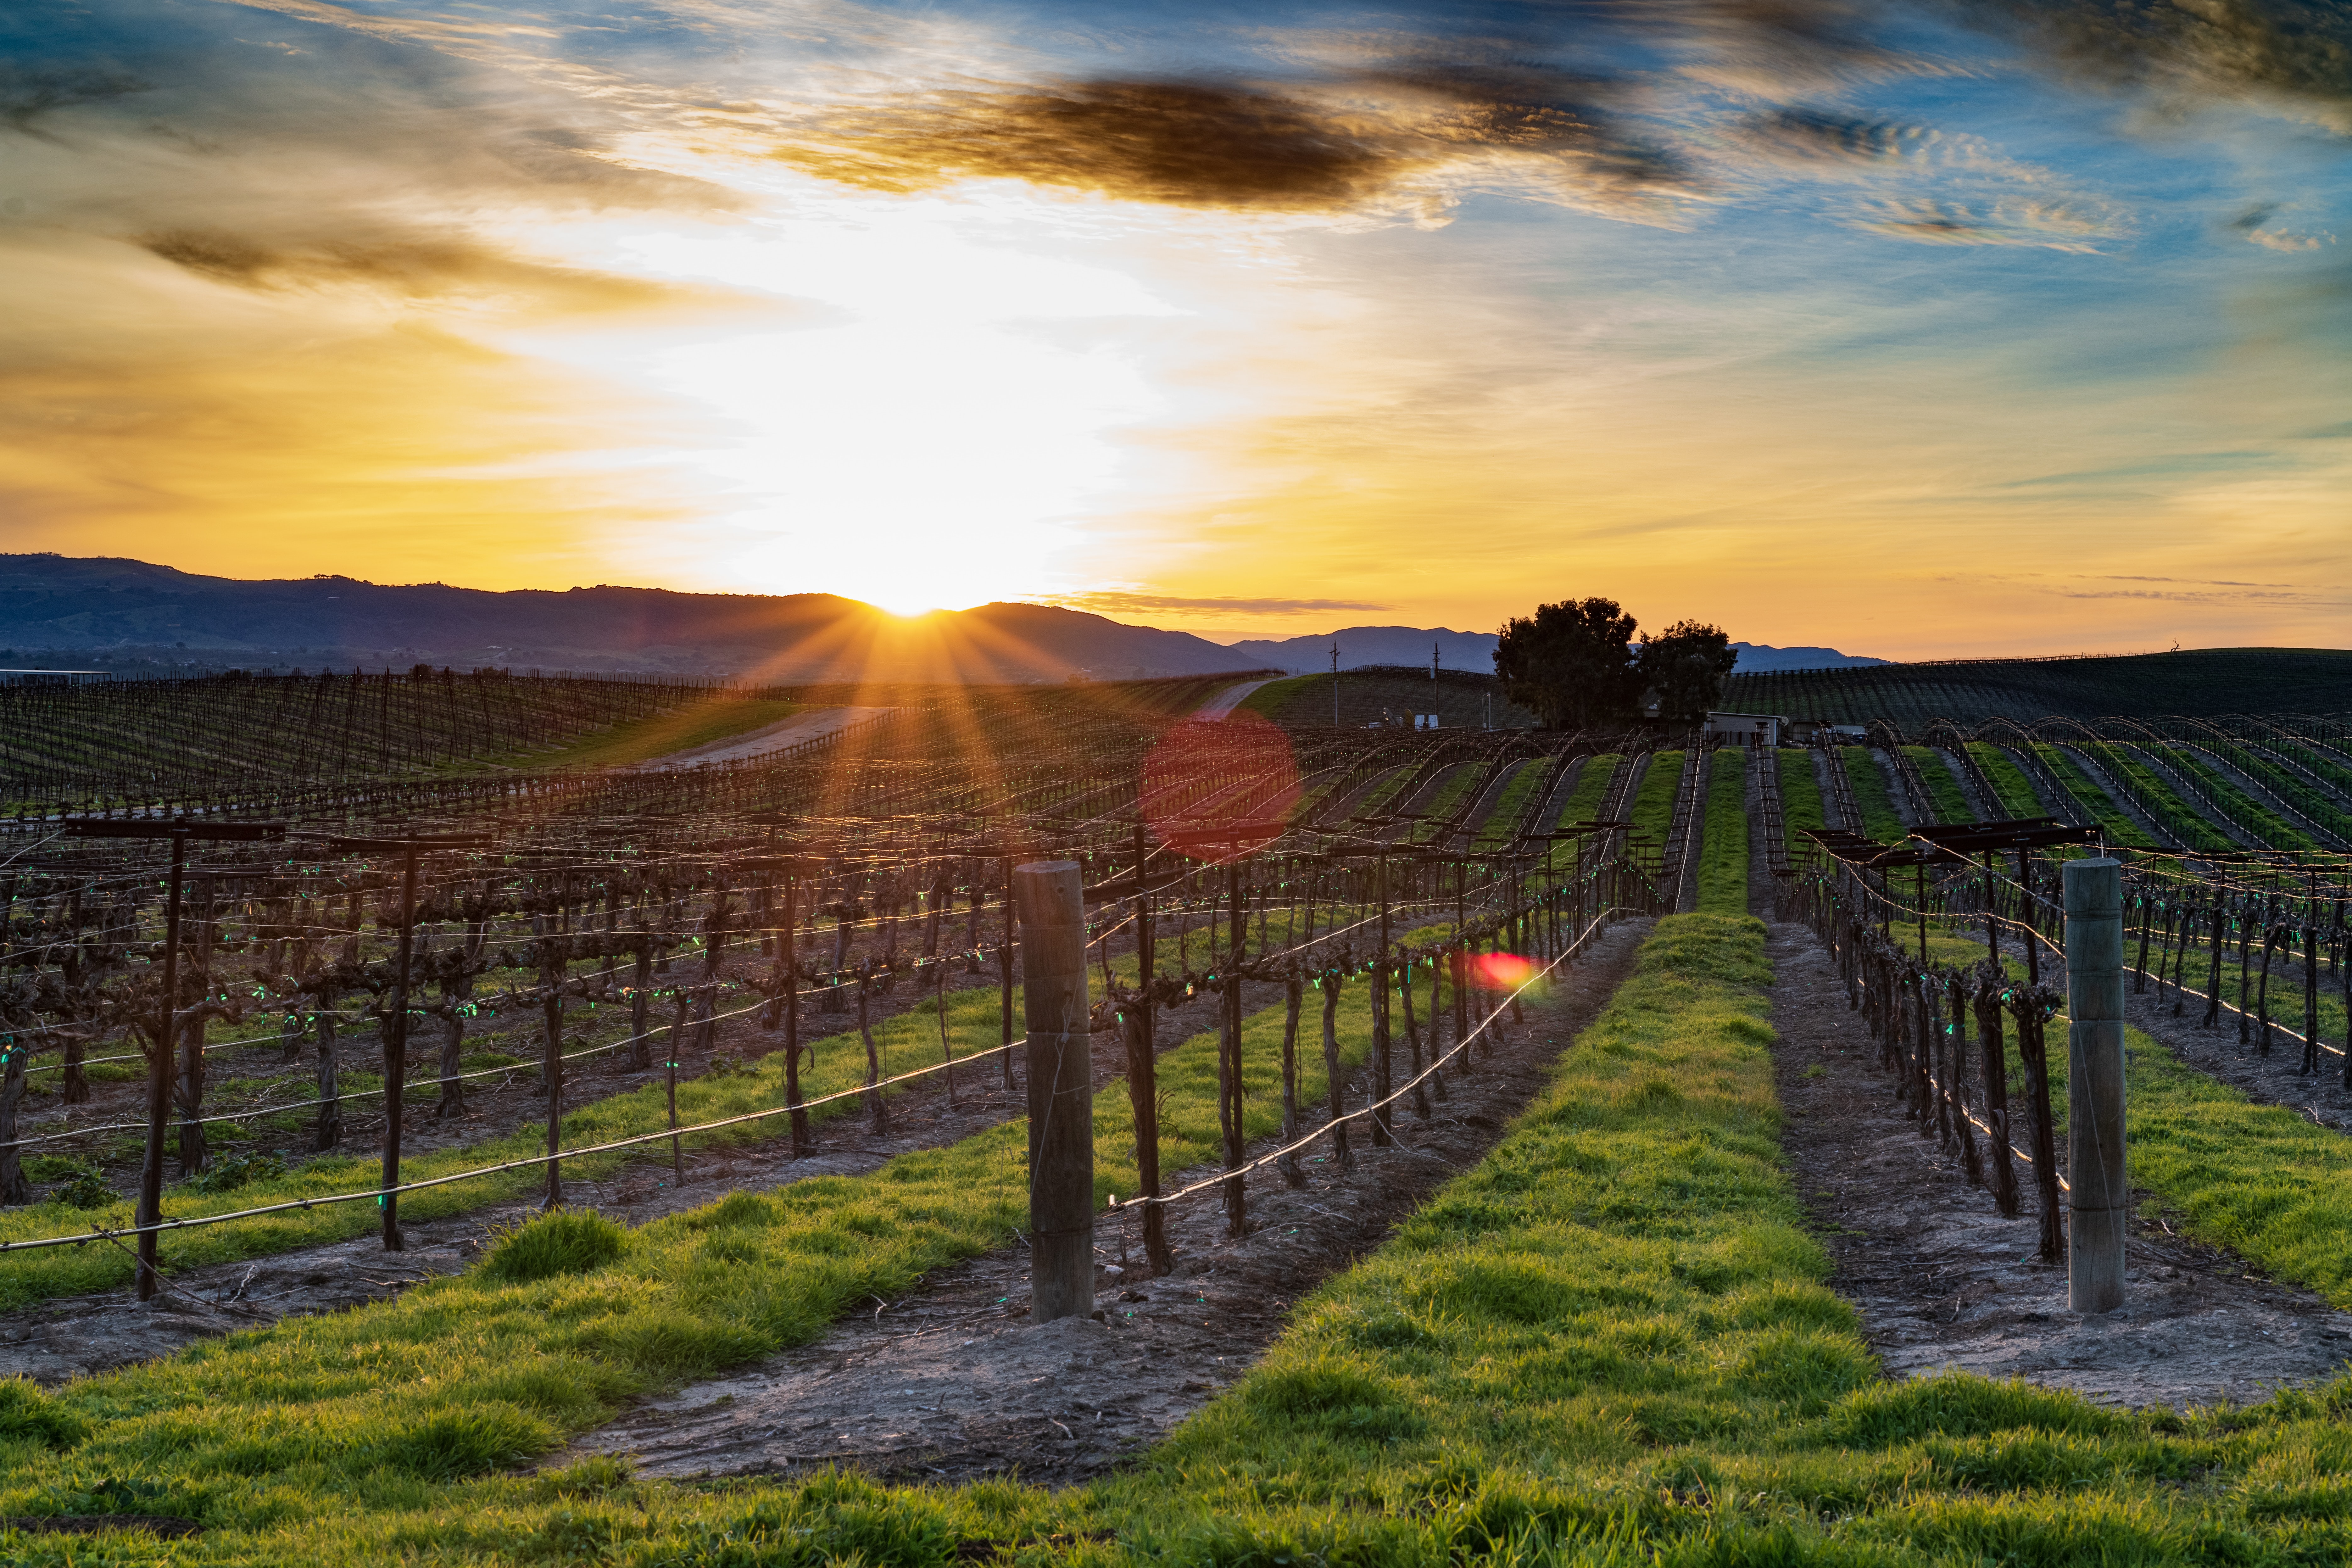 Grape Vines during sunset in Napa Valley.